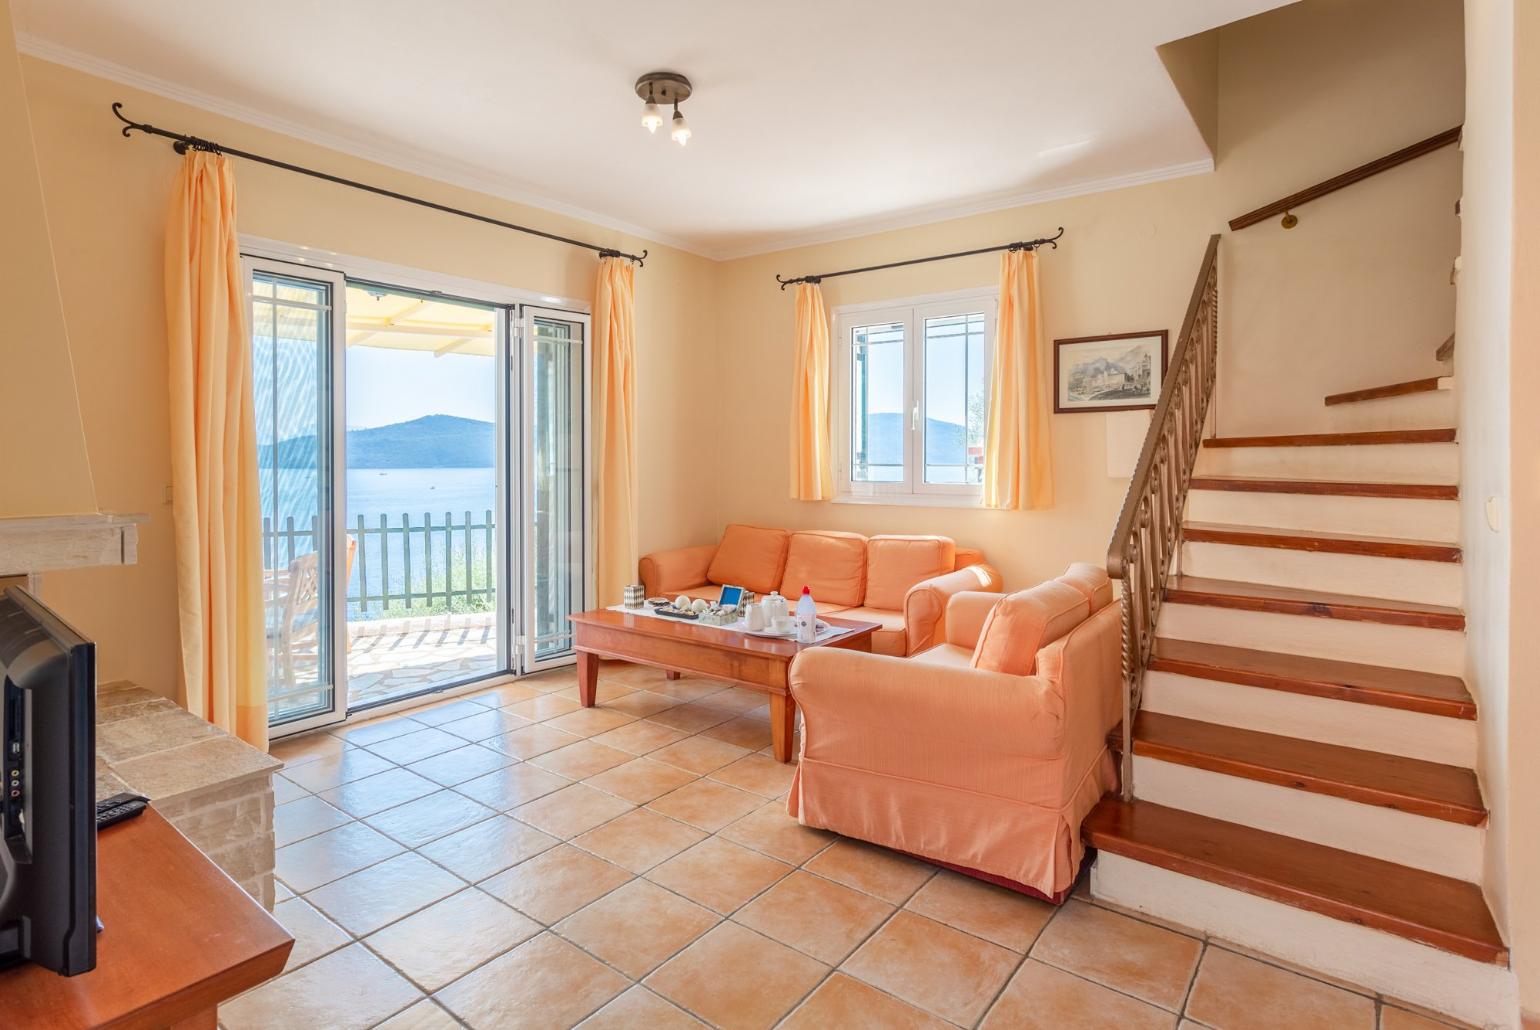 Open-plan living room with sofas, dining area, kitchen, ornamental fireplace, A/C, WiFi internet, satellite TV, and terrace access with panoramic sea views